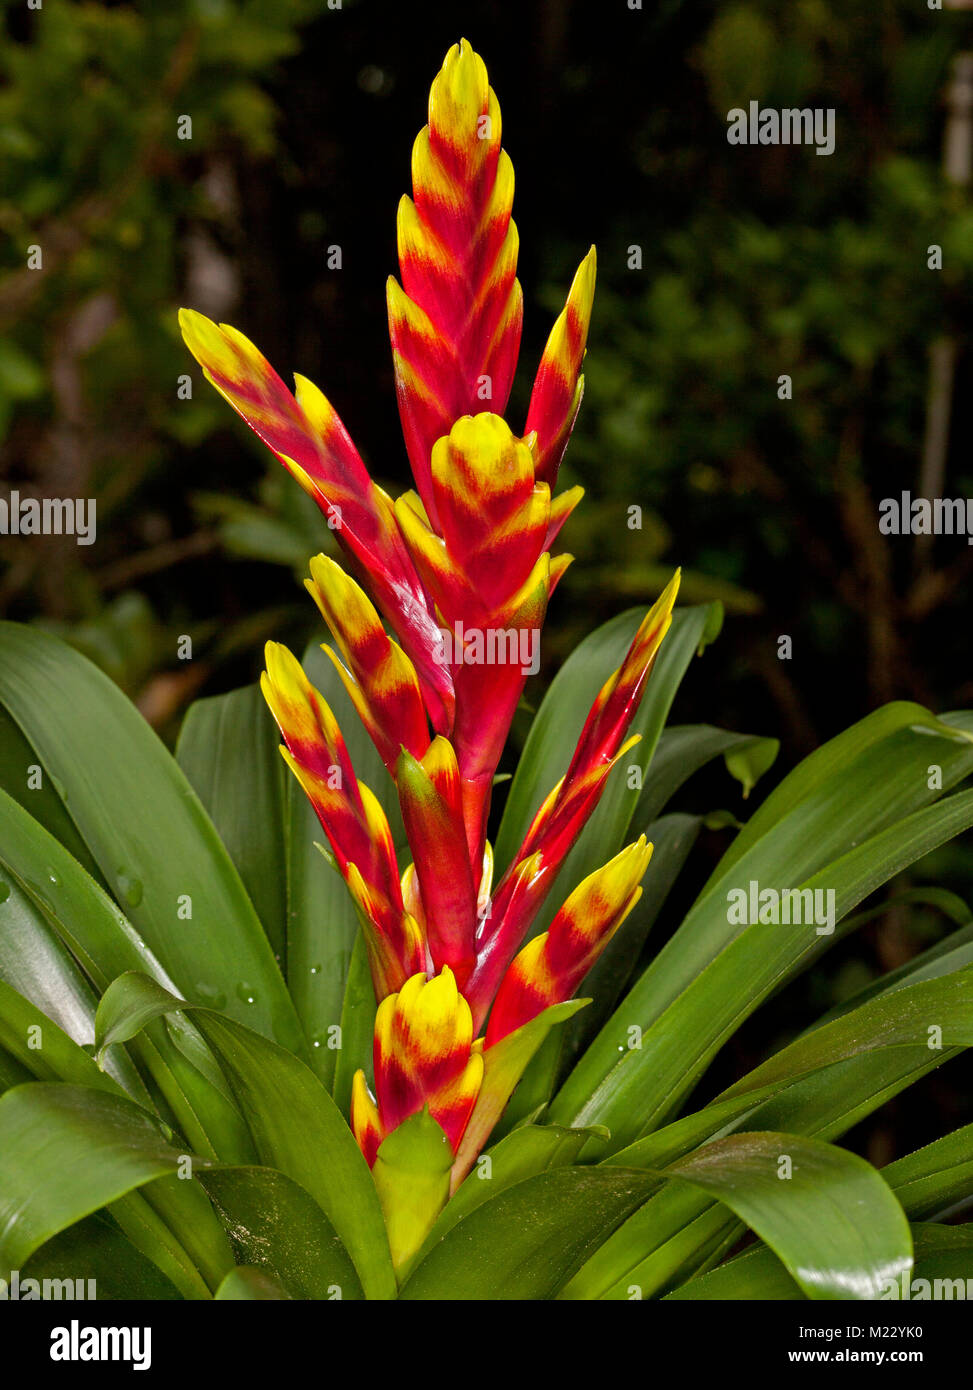 Vivid red and yellow flower bracts and green leaves of Vriesea, a bromeliad against dark background Stock Photo